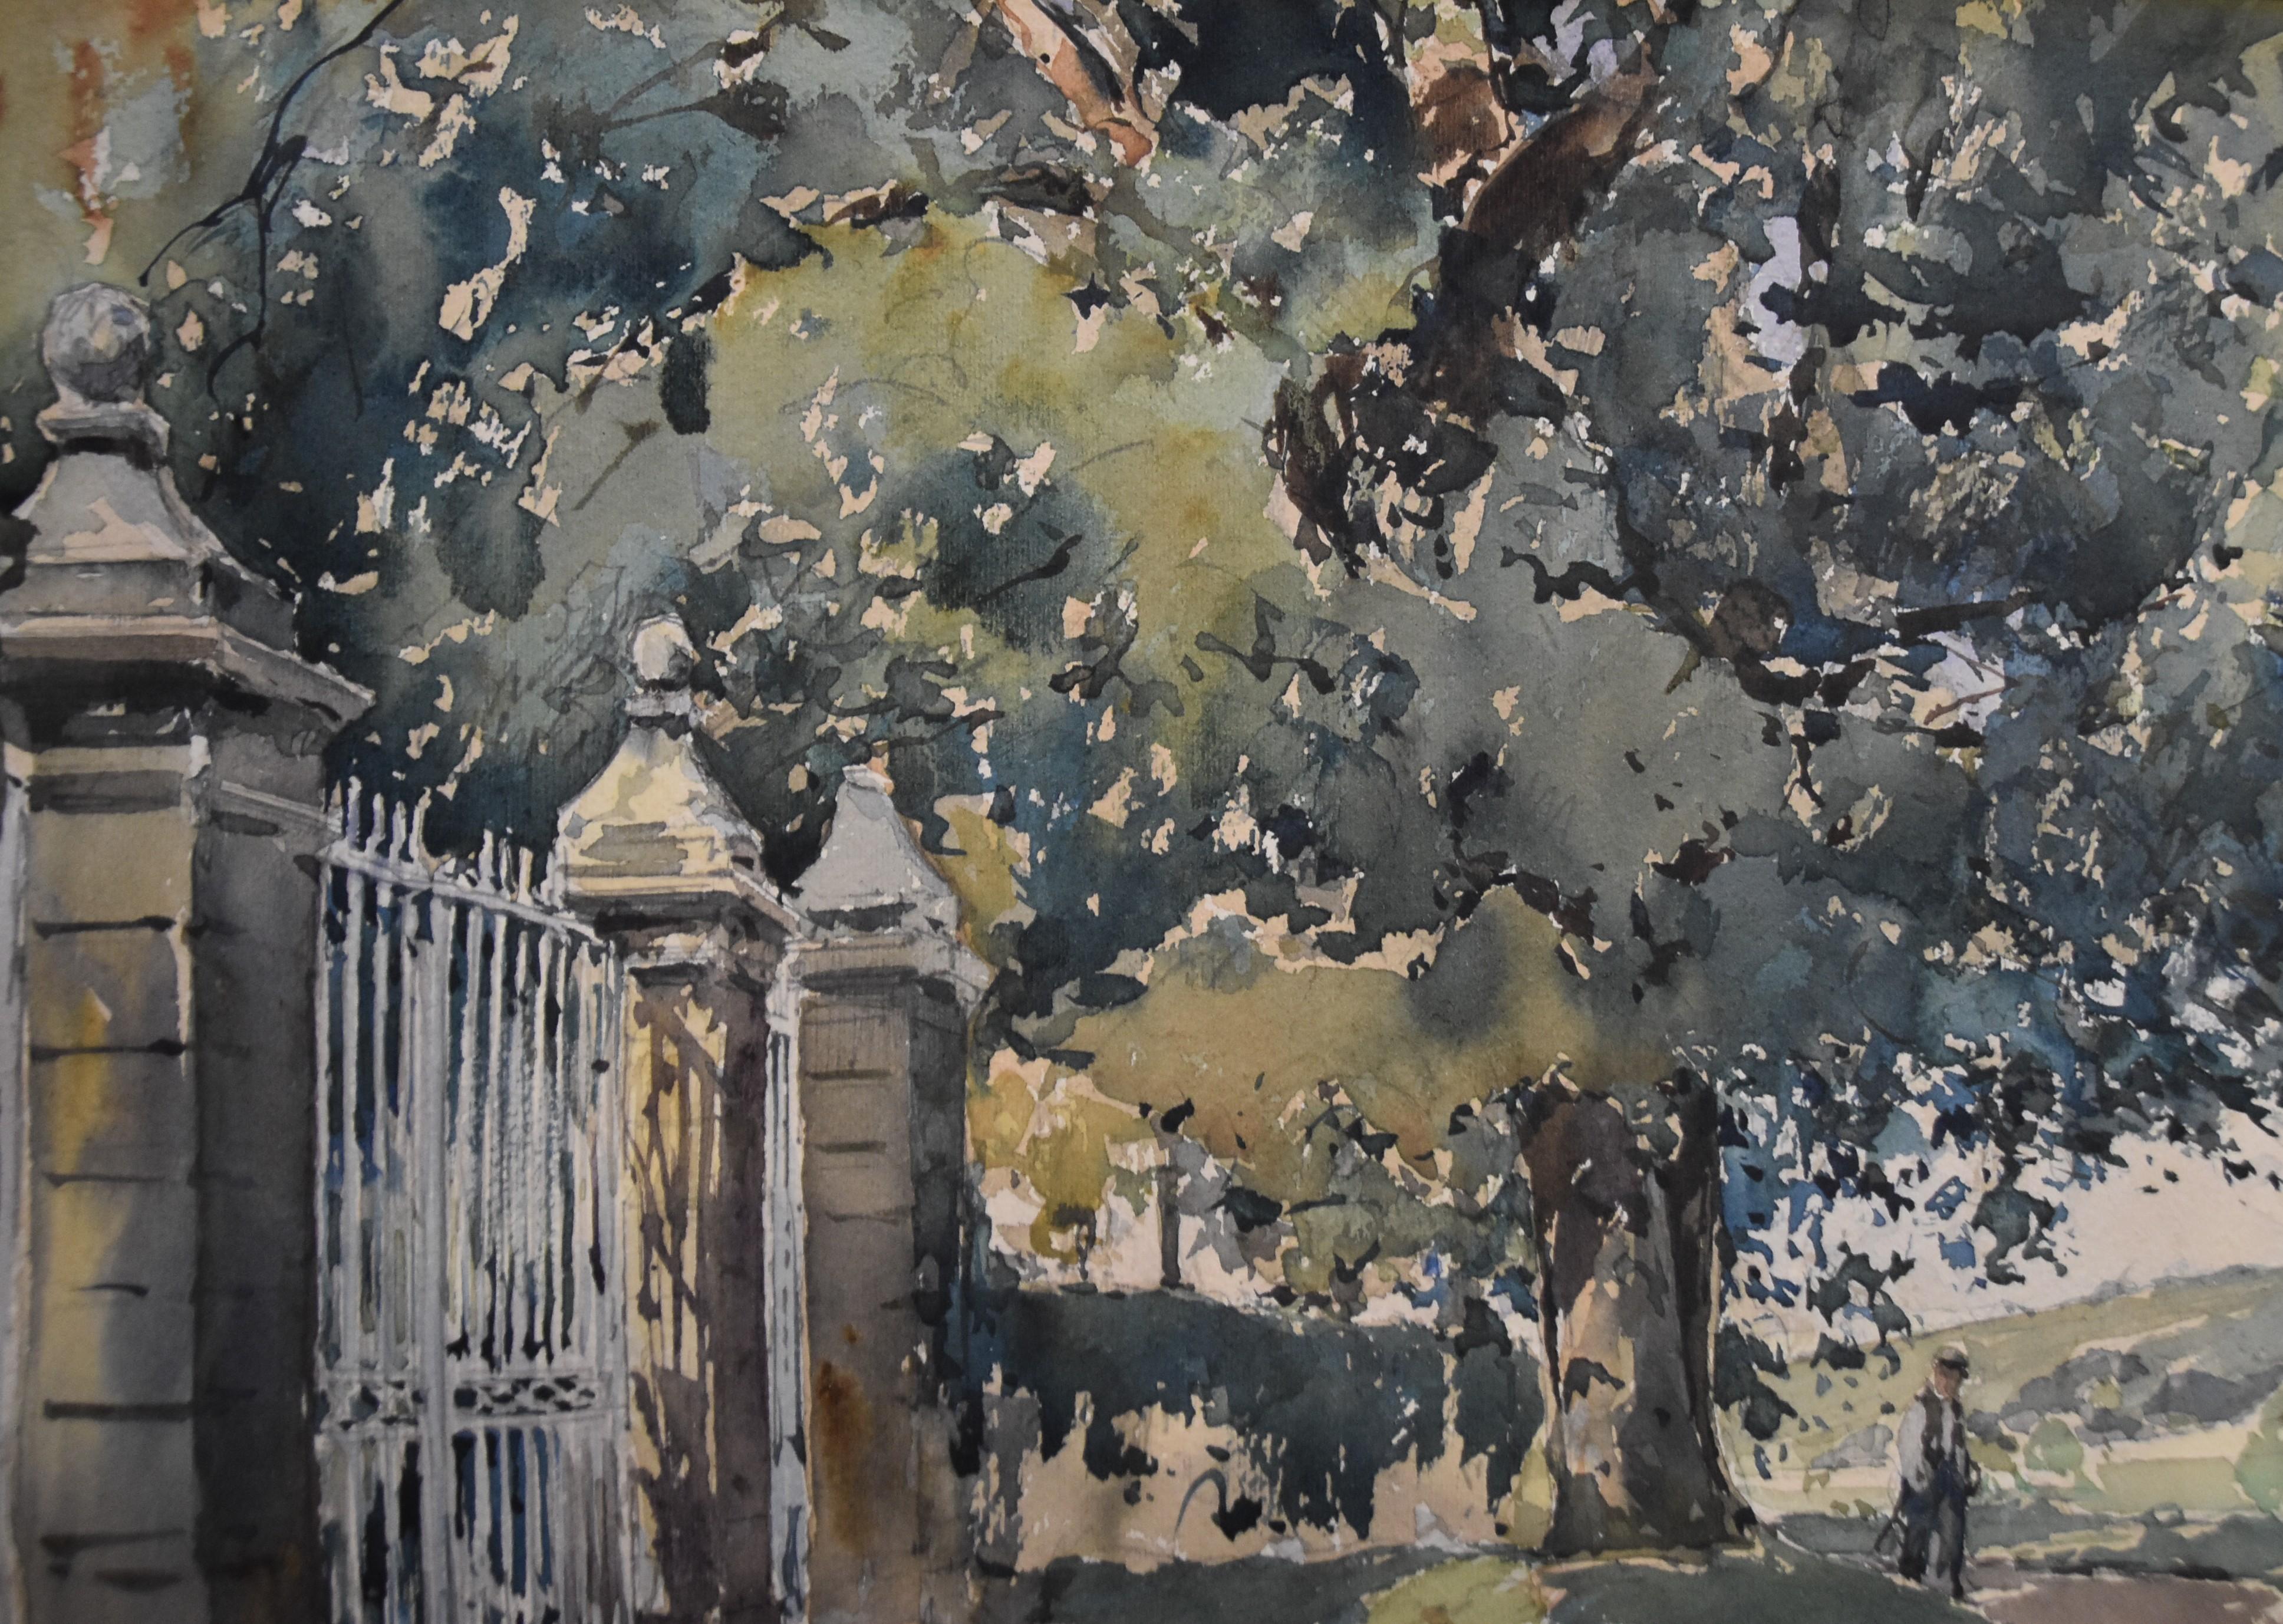 Paul Emile Lecomte (1877-1950)
La Grille (The Gate)
Signed lower left
Watercolor on paper
27 x 37 cm
In quite condition: yellowed by time, some stains
Framed: 43 x 53 cm

Paul Emile Lecomte (1877– 1950). Painter of watercolors and oil paintings,